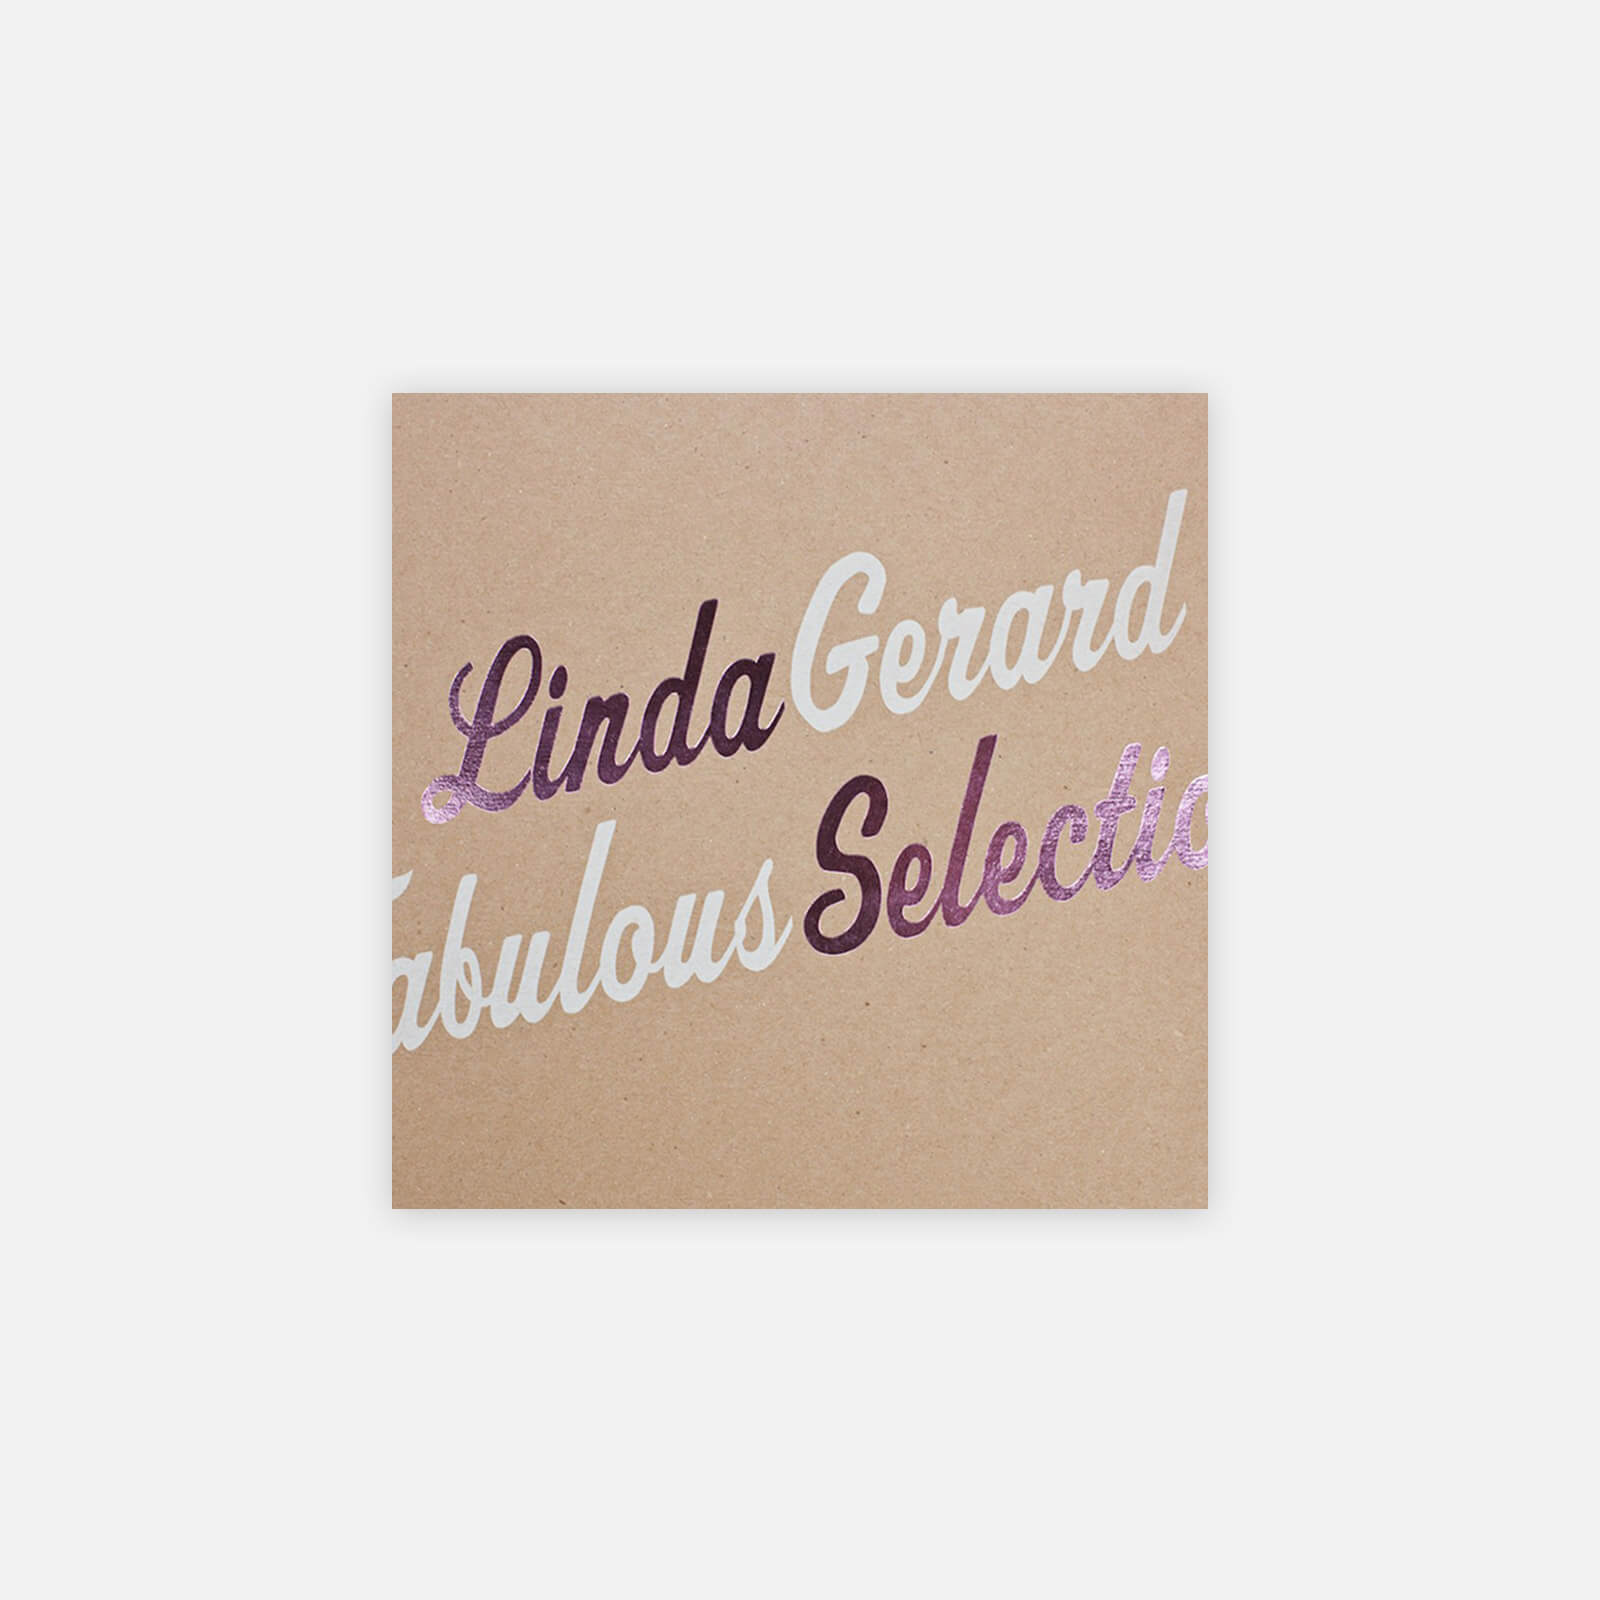 Linda Gerard 'Fabulous Selections' *All proceeds go to charity: MyMusicRx* 